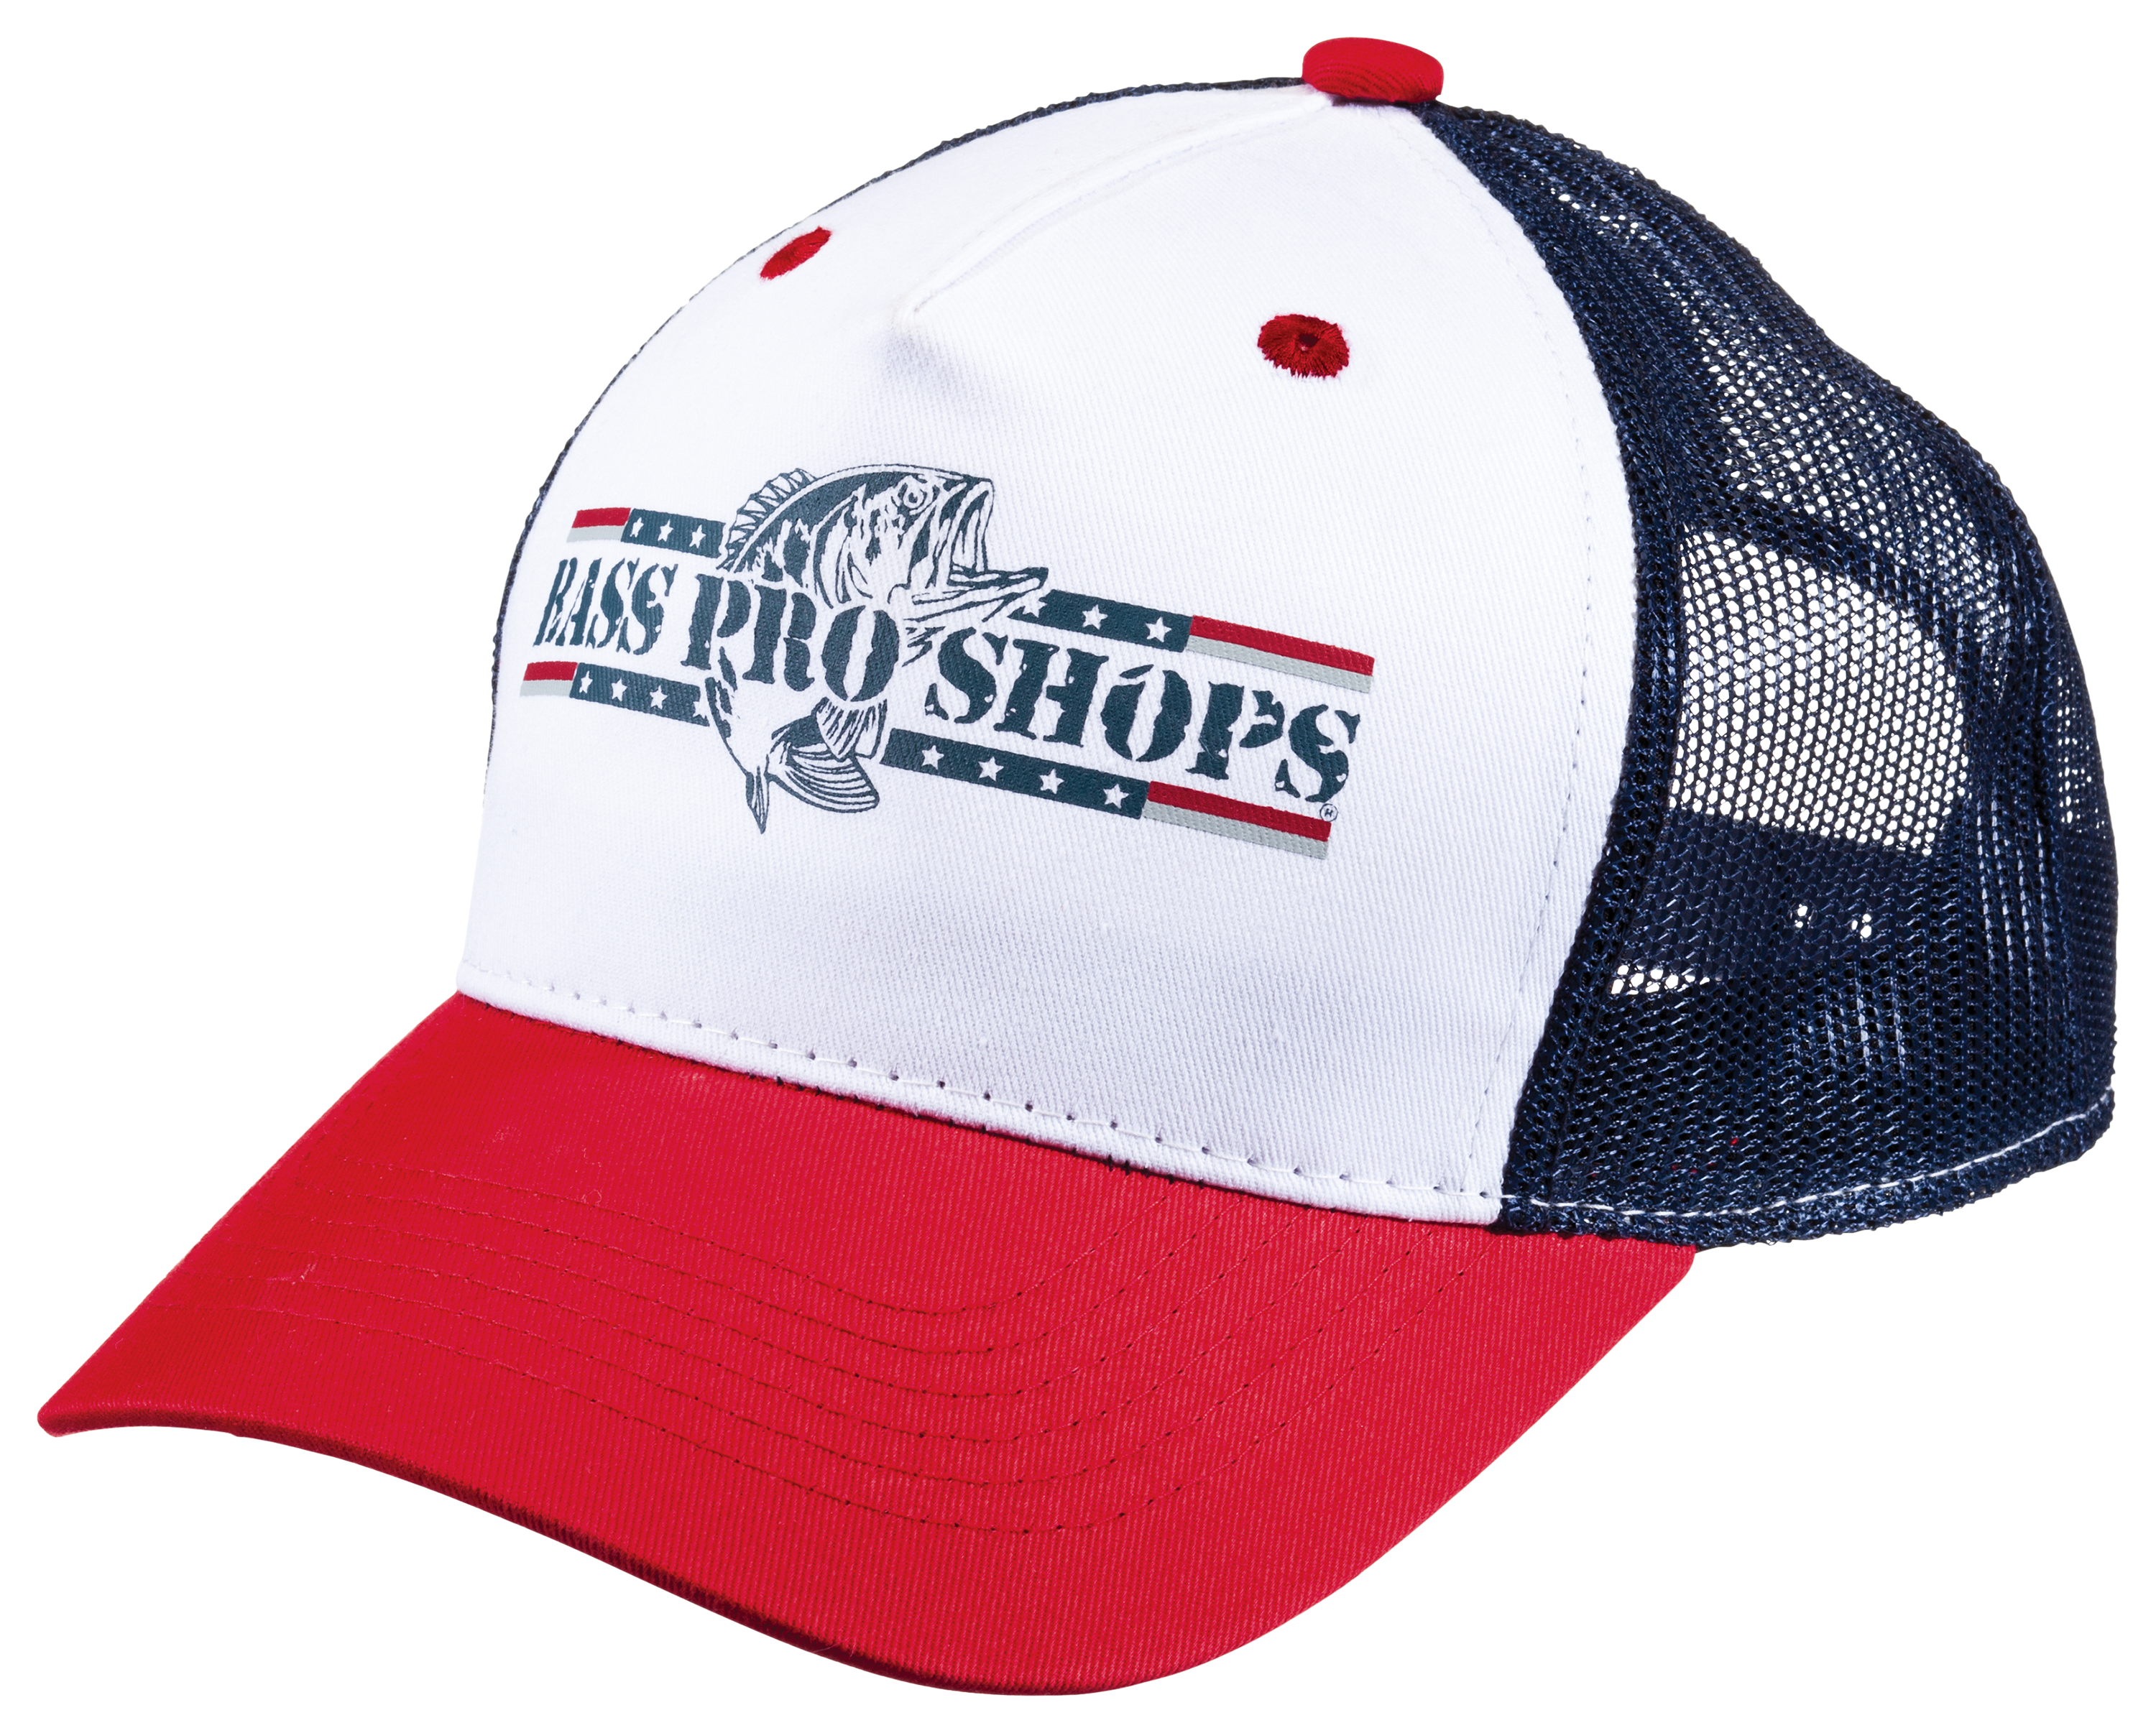 Bass Pro Shops Stars and Stripes Cap